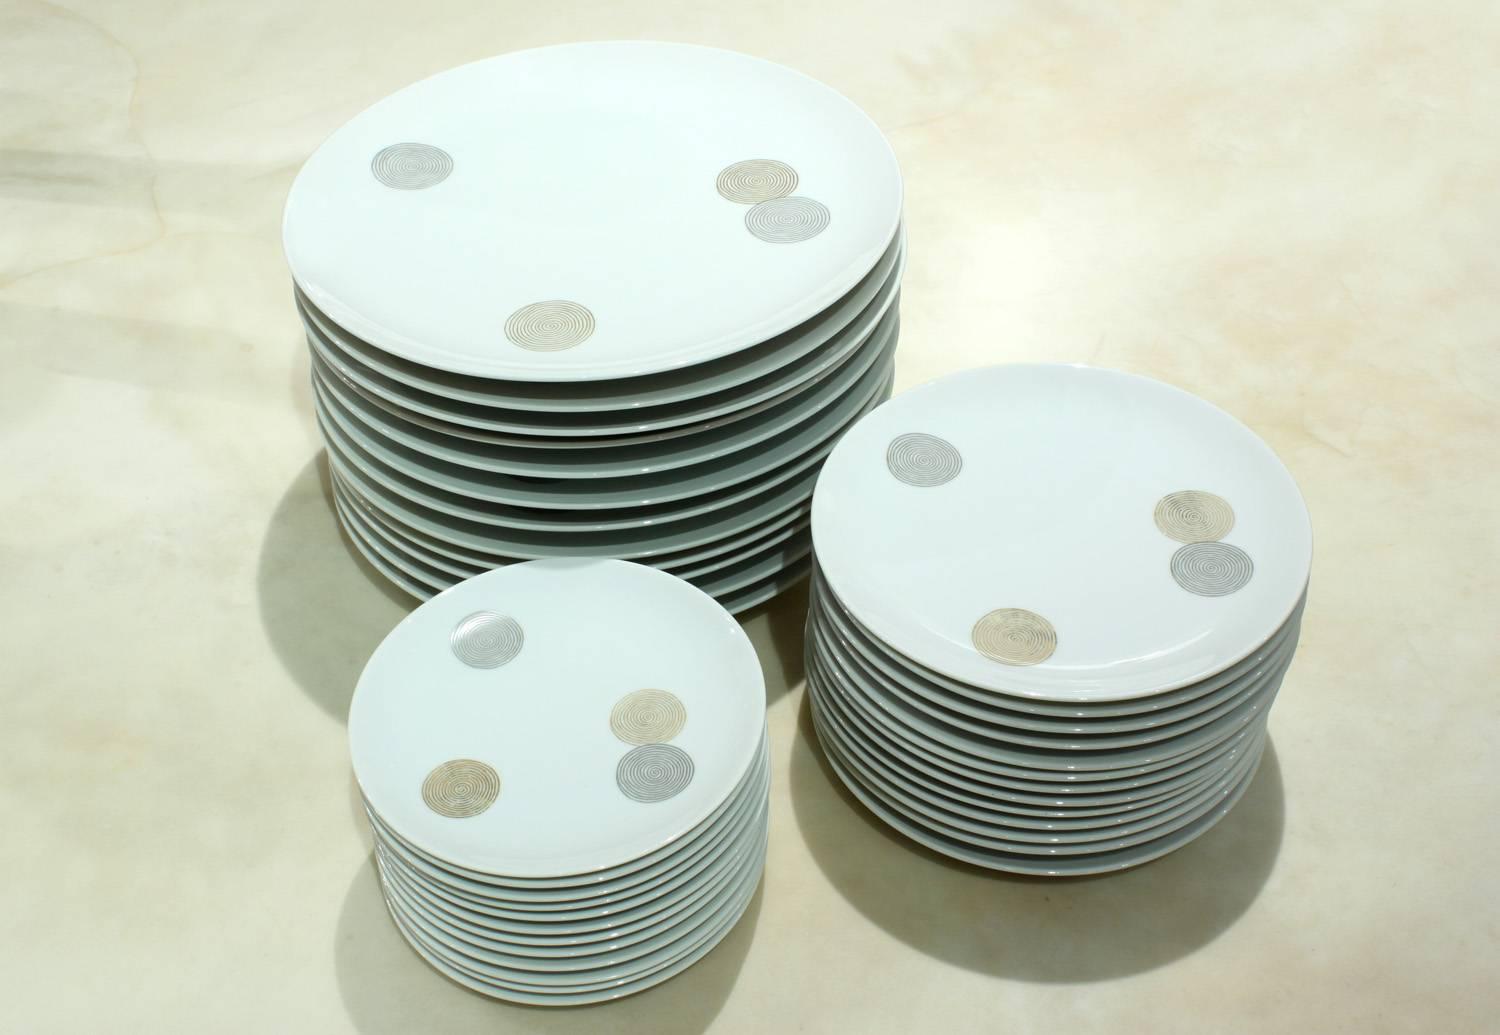 Fine dinnerware service for 12 with concentric circle design in gold and silver by Raymond Loewy for Continental China, Germany, 1950s (signed on bottom).
This is a rare and beautiful china service by one of the best Mid-Century